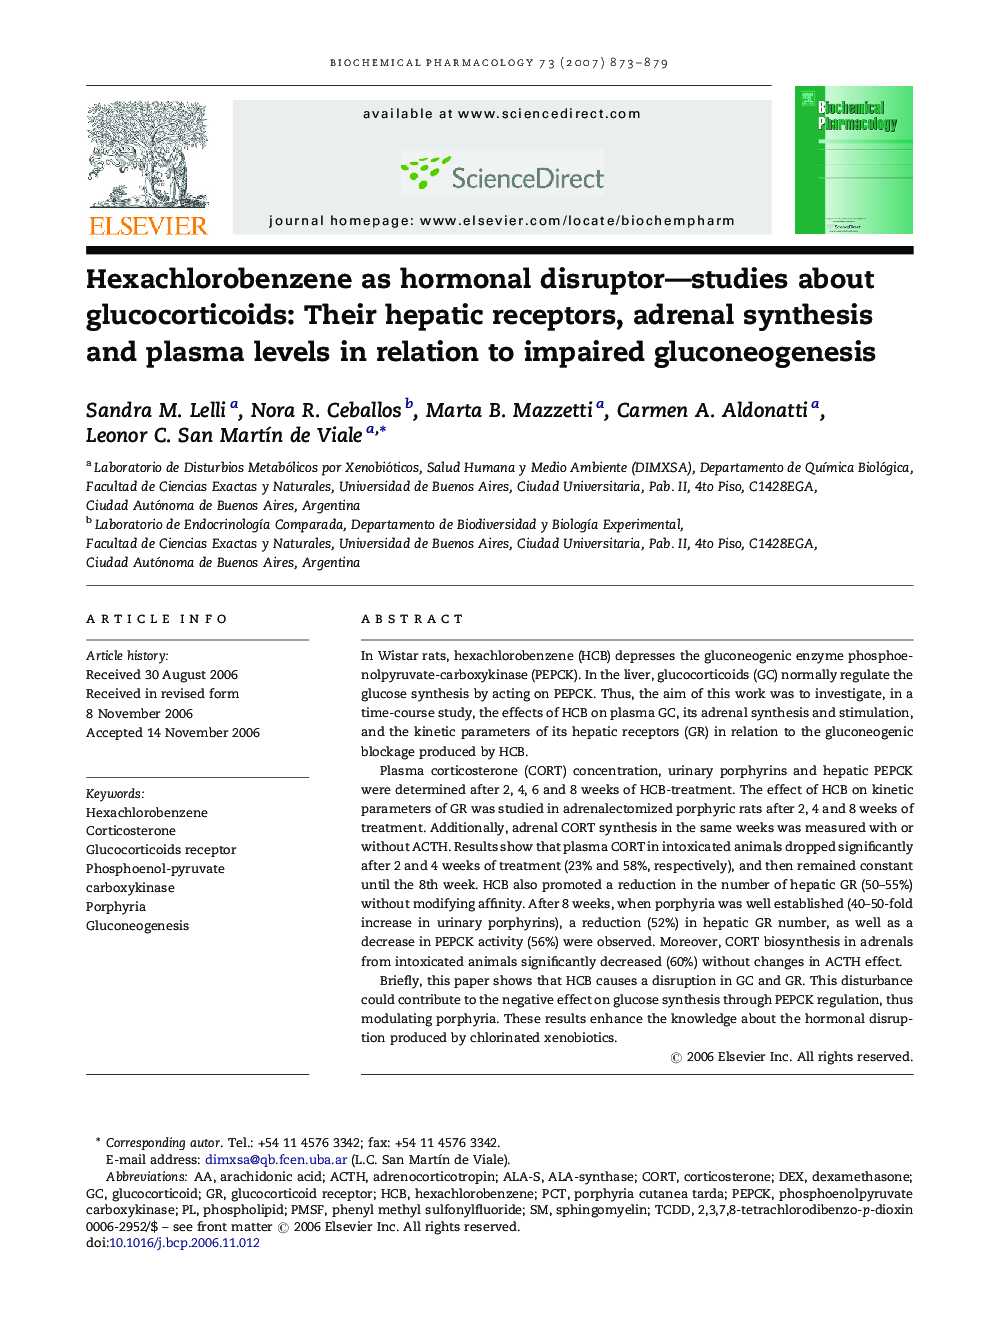 Hexachlorobenzene as hormonal disruptor—studies about glucocorticoids: Their hepatic receptors, adrenal synthesis and plasma levels in relation to impaired gluconeogenesis